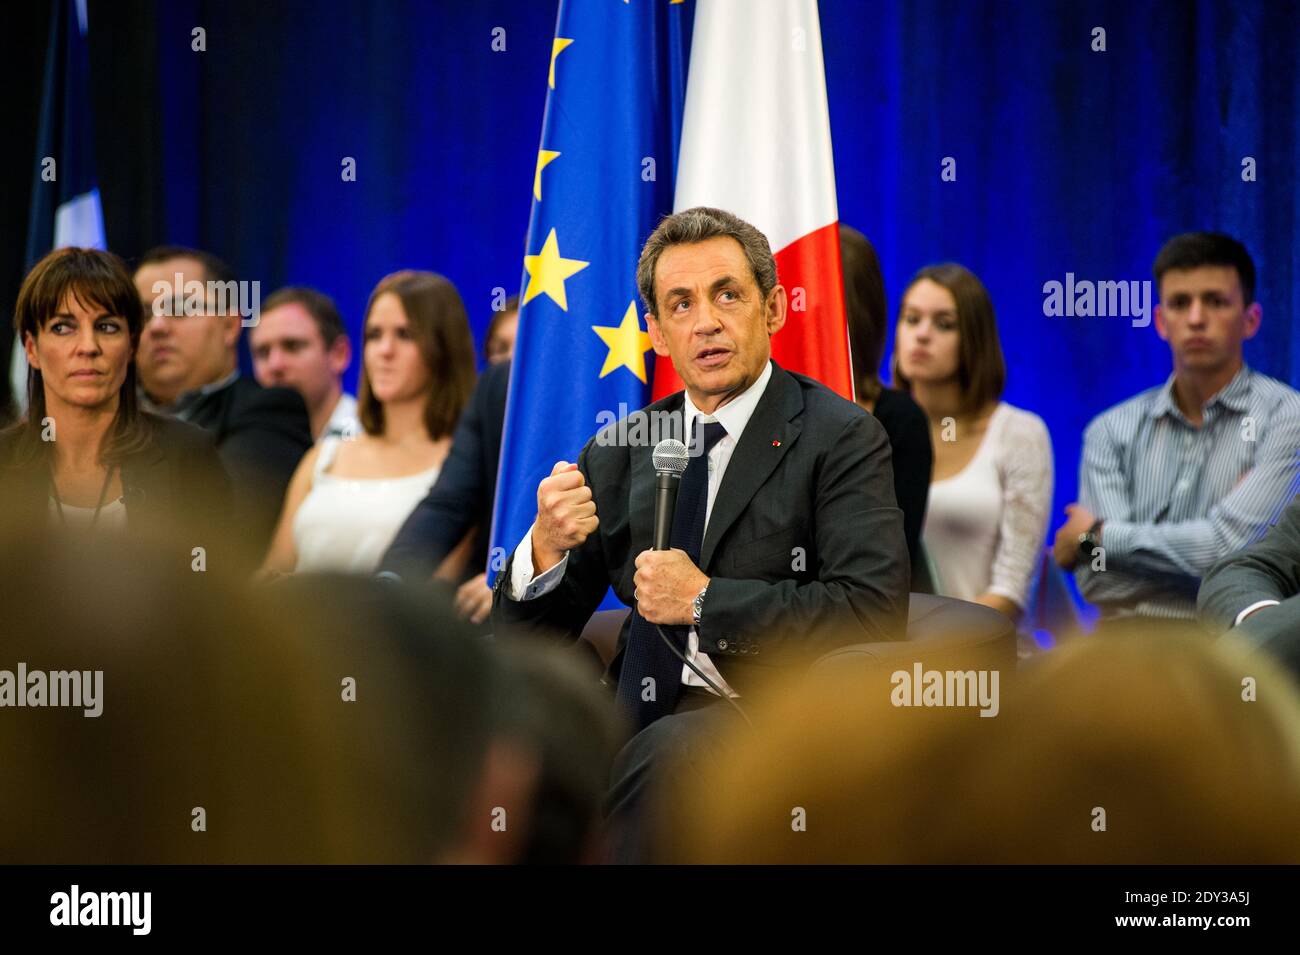 Former French President Nicolas Sarkozy, who is a candidate for the leadership of the opposition rightist UMP party, answers questions on October 8, 2014 during a public meeting in the southern city of Toulouse. Photo by Franck Alix/ABACAPRESS.COM Stock Photo